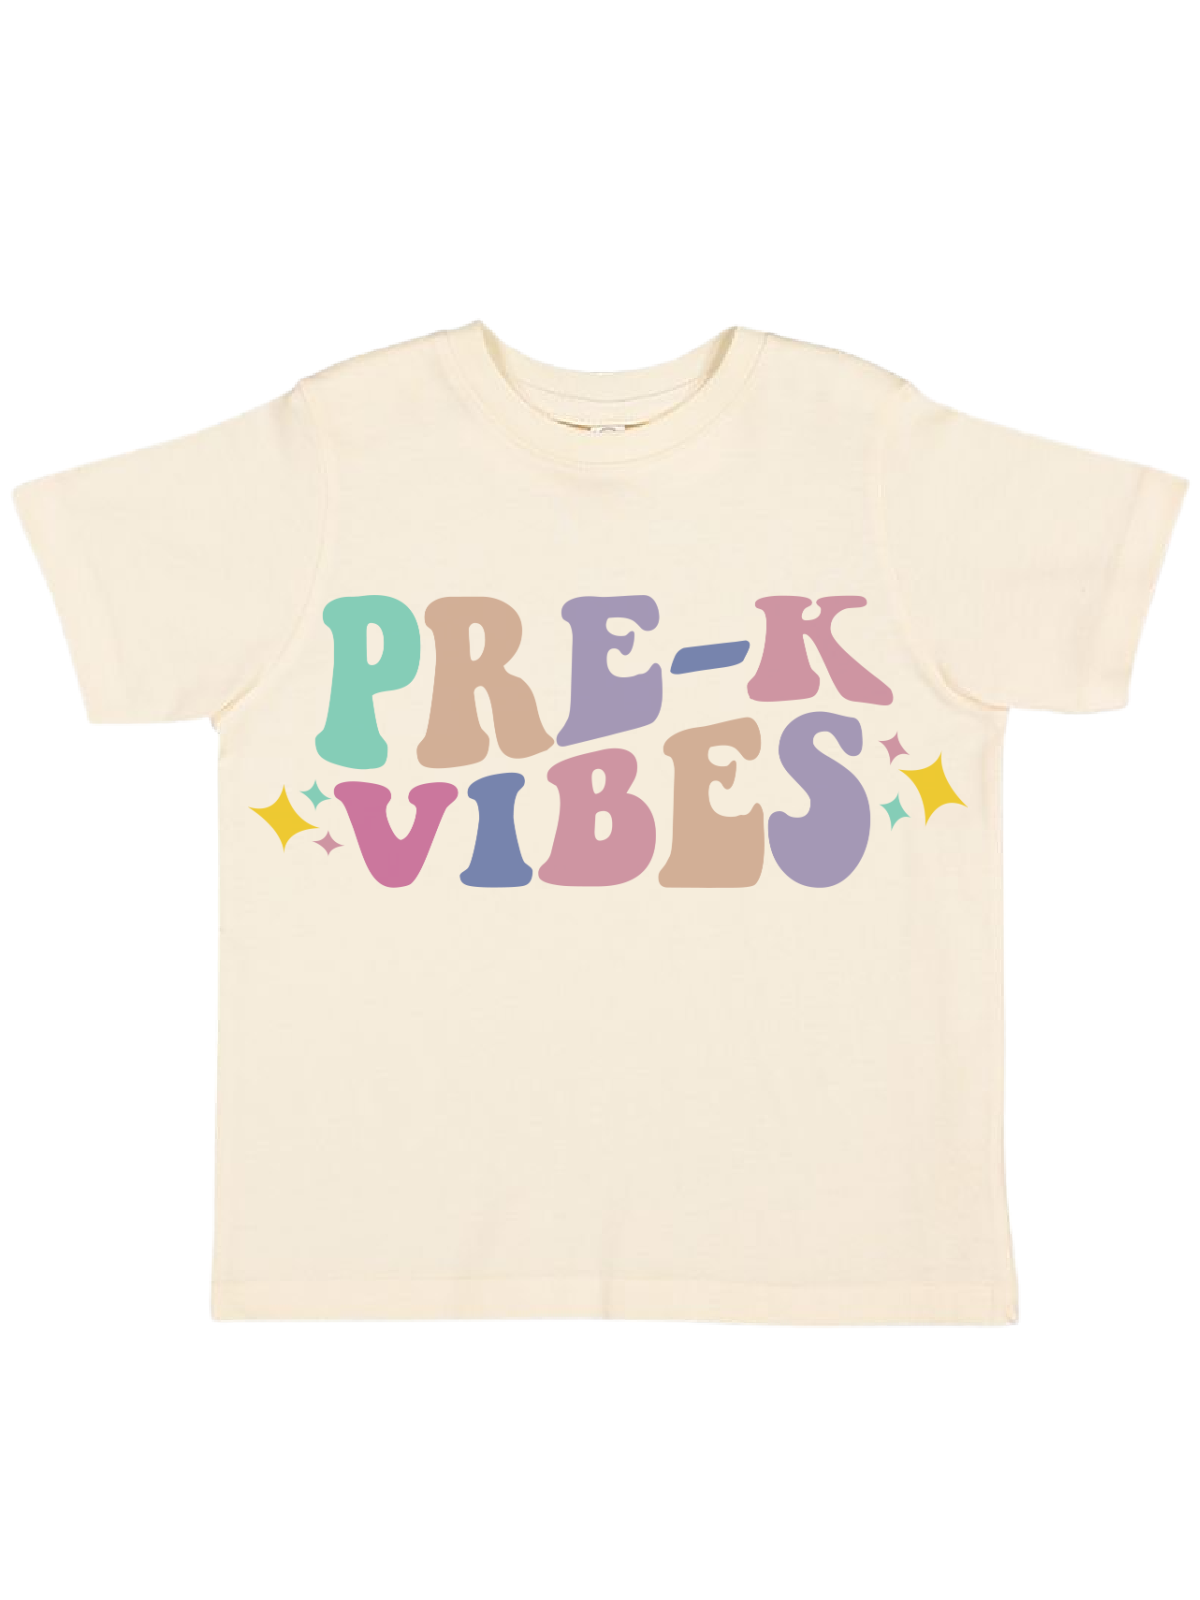 Pre-K Vibes Kids Natural First Day of School Shirt